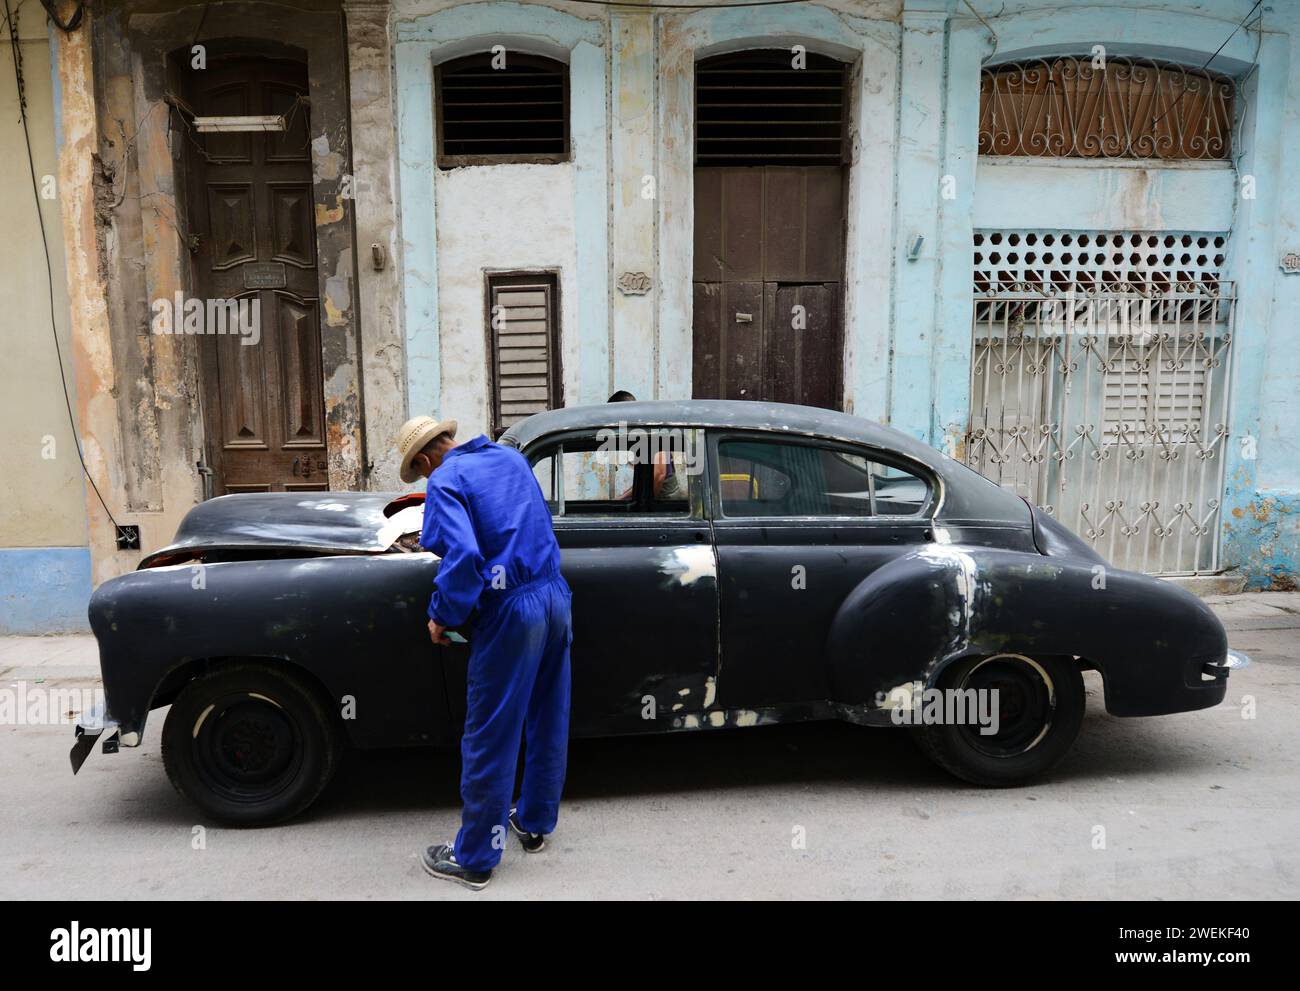 Fixing an old Chevrolet car on the street in Old Havana, Cuba. Stock Photo